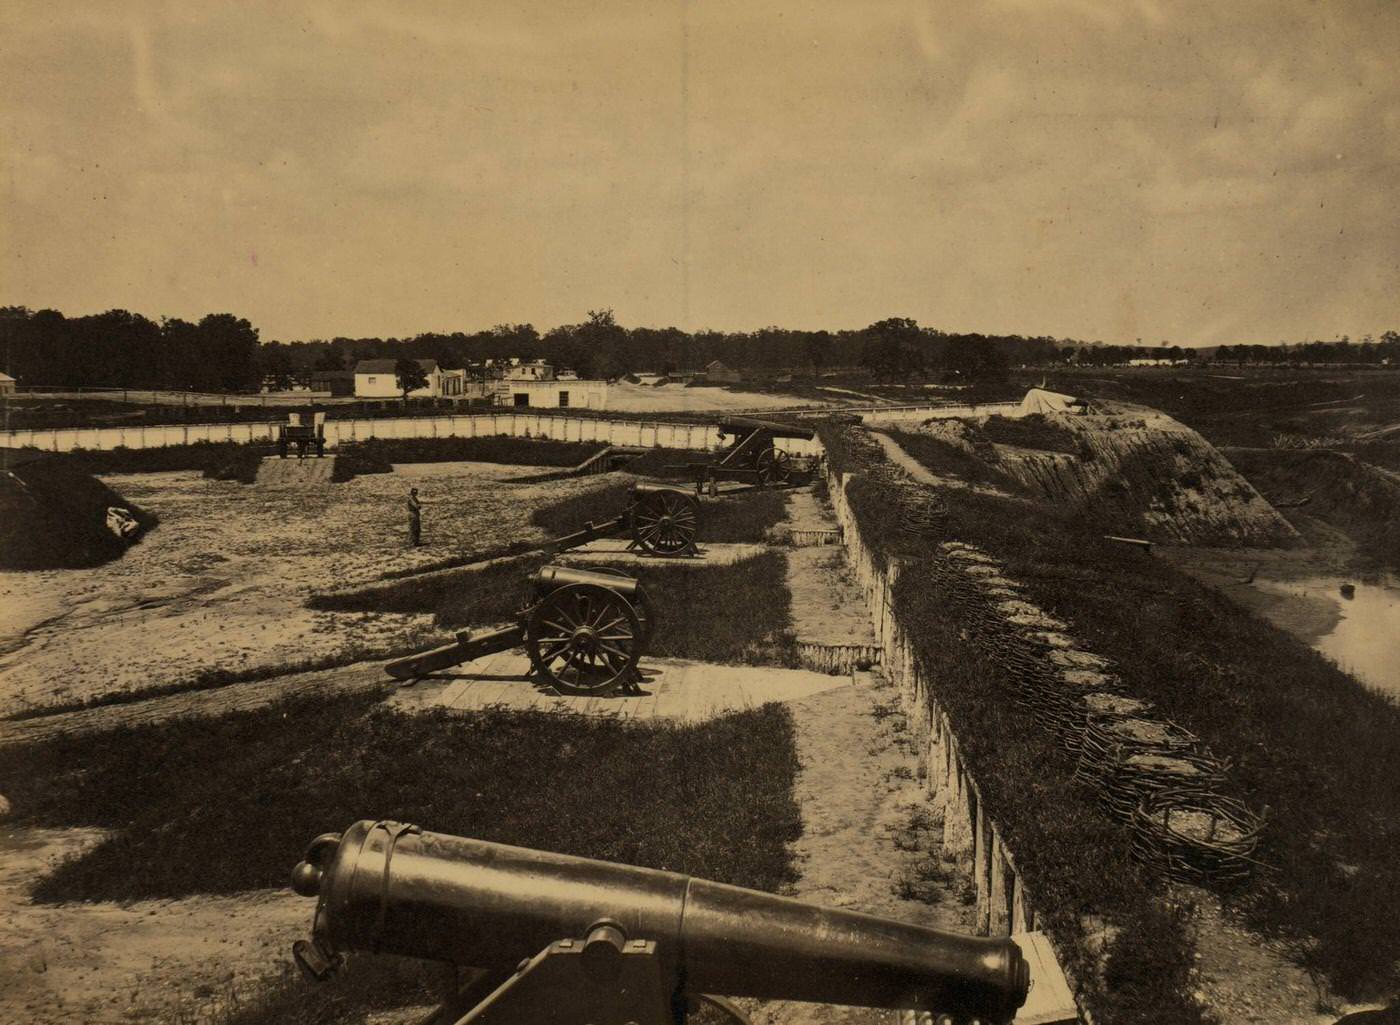 Mounted guns and ammunition around the perimeter of a fort Washington, D.C., 1863